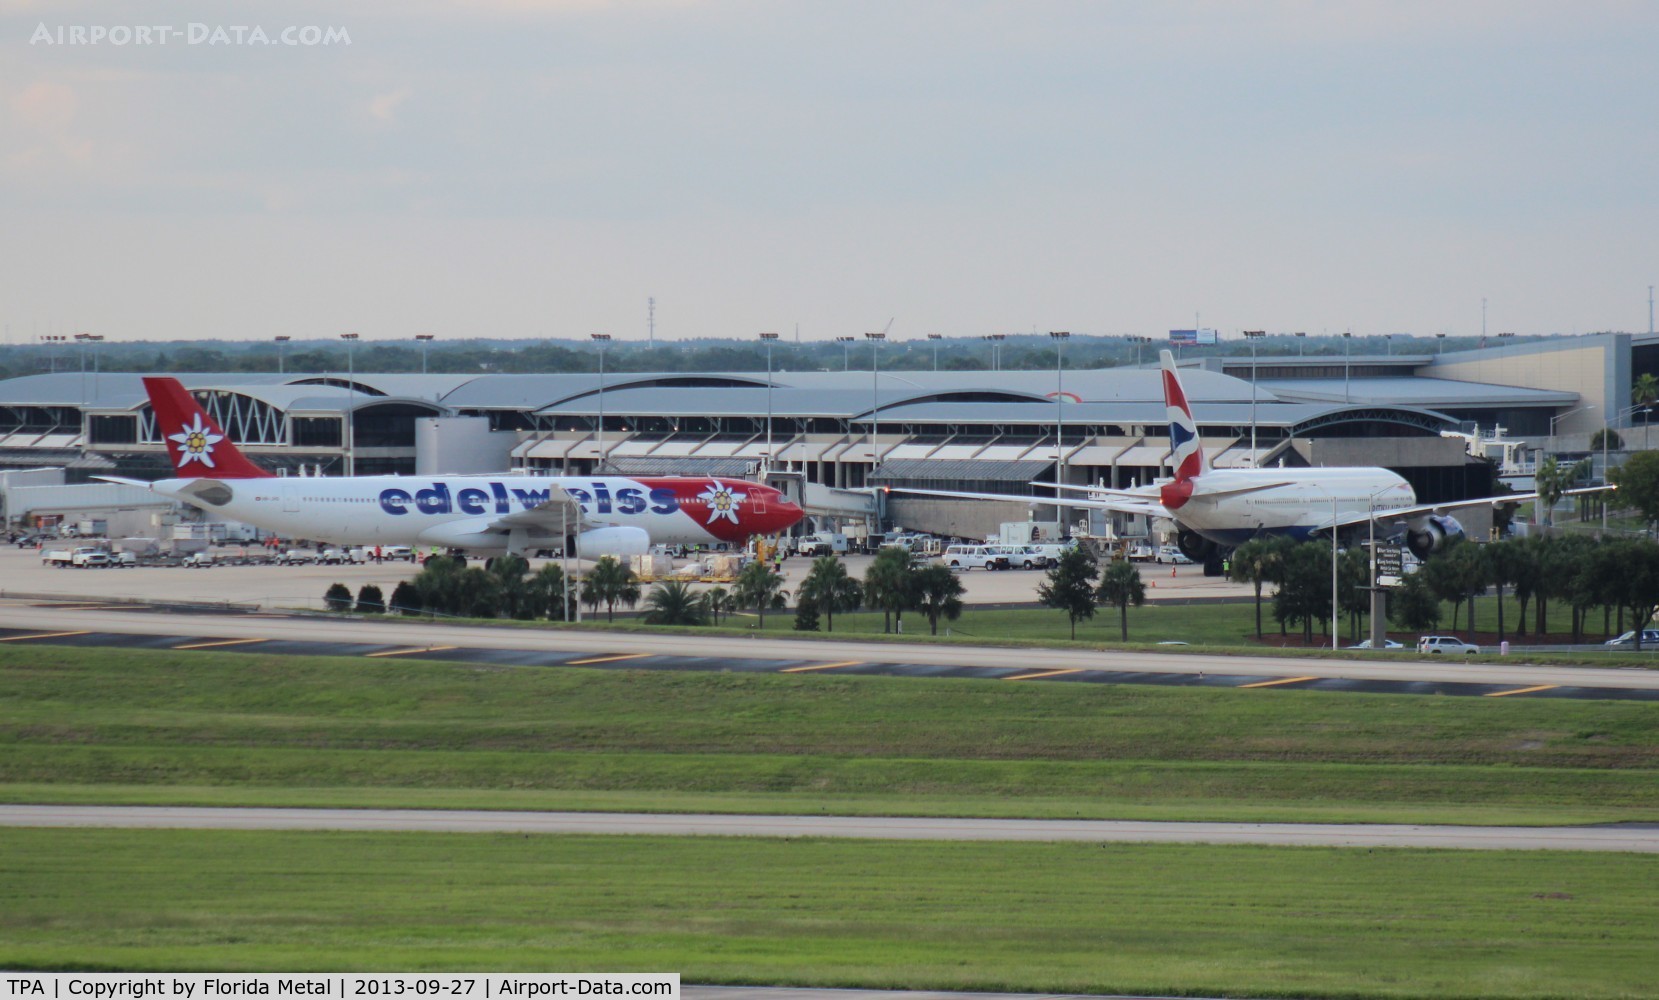 Tampa International Airport (TPA) - Edelweiss and British Airways at Terminal